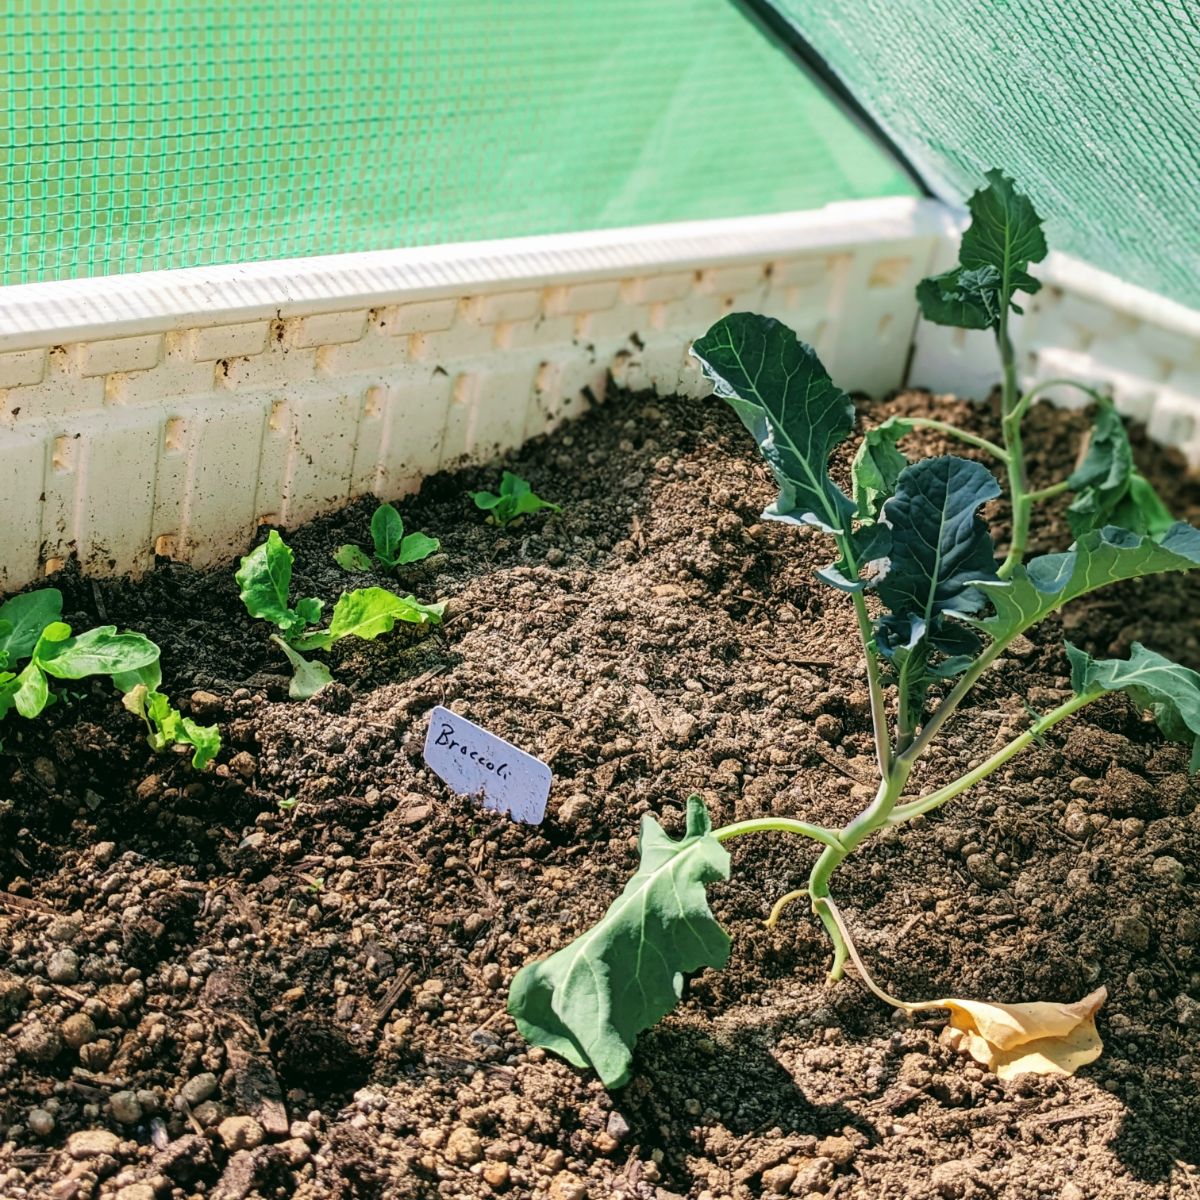 Lettuce and broccoli growing together in a raised bed with a greenhouse cover